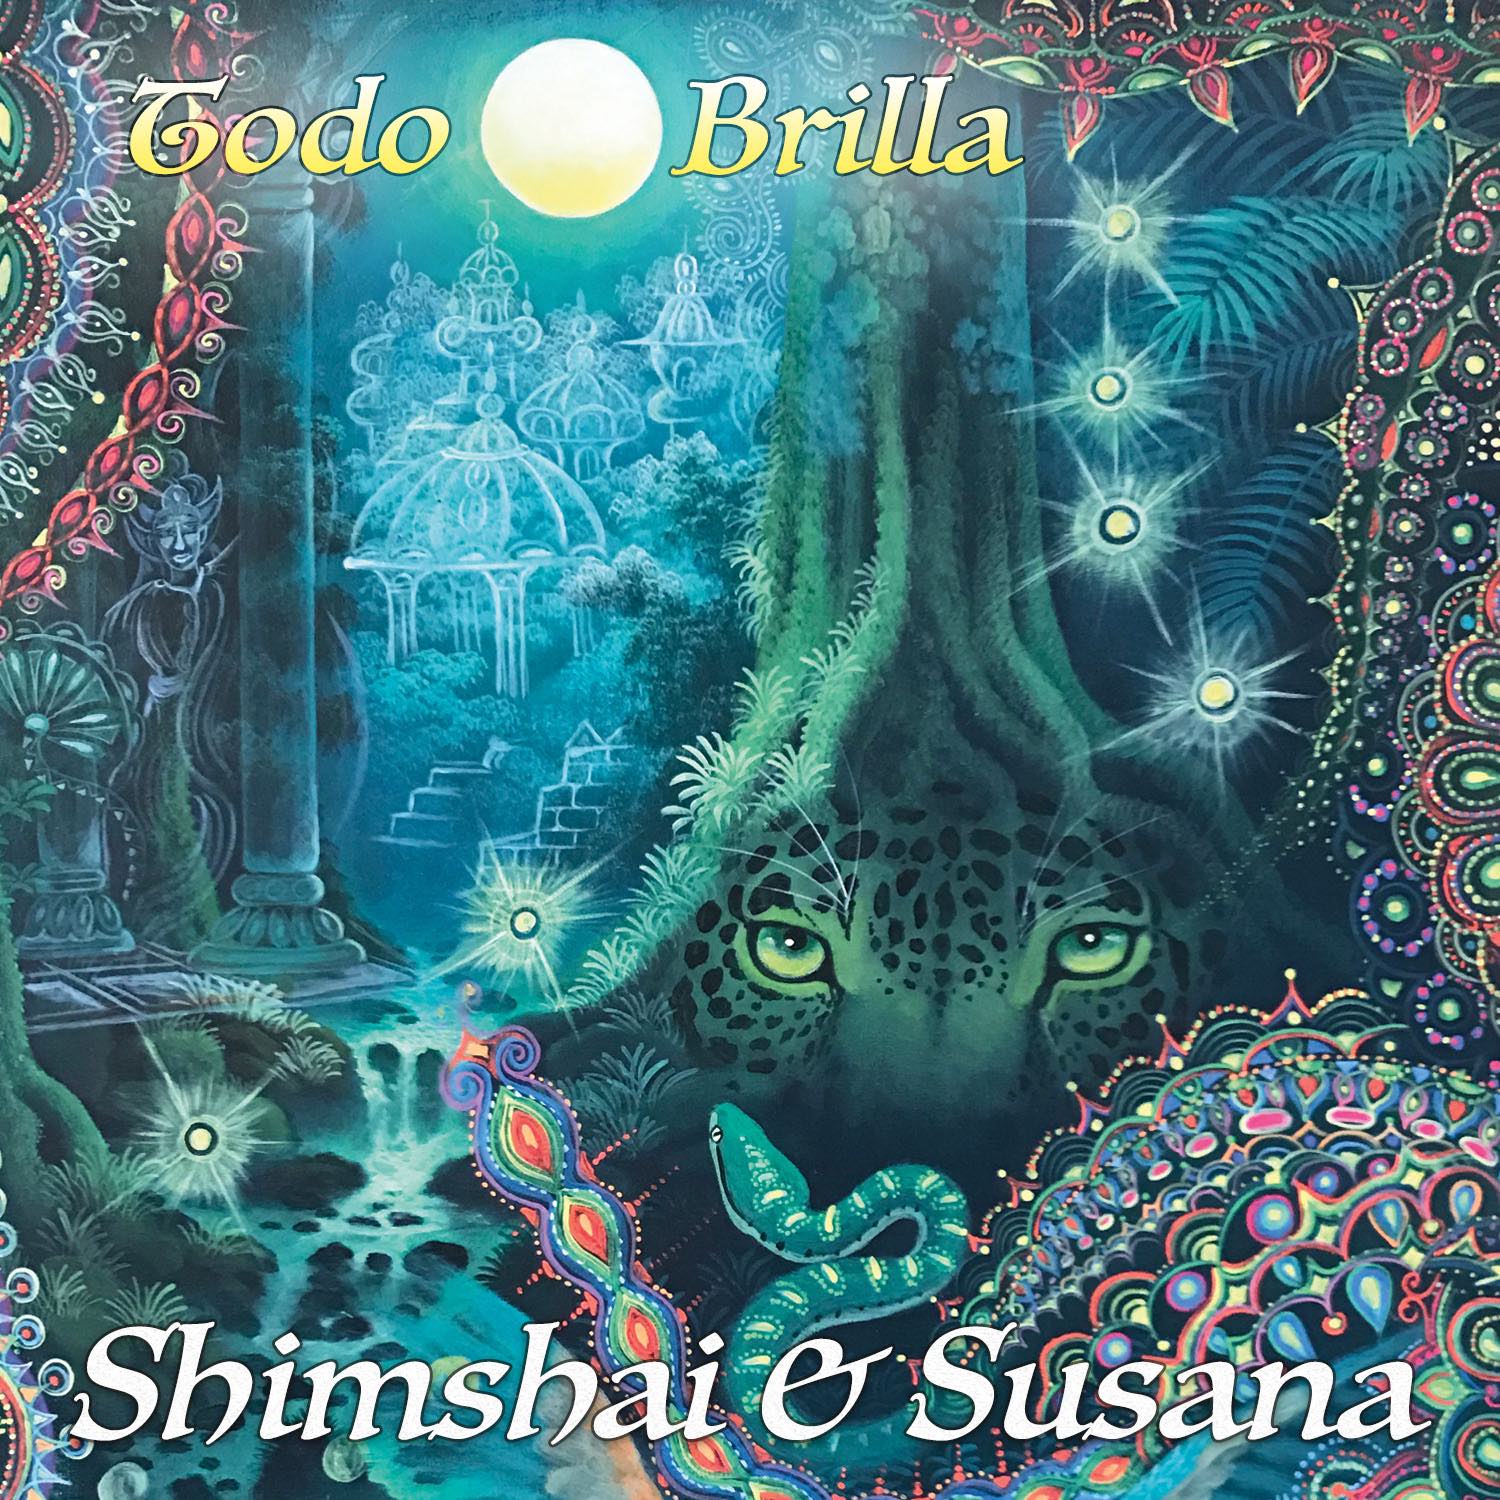 Los Magos from the Moondance in Mexico from the album Todo Brilla by Shimshai & Susana